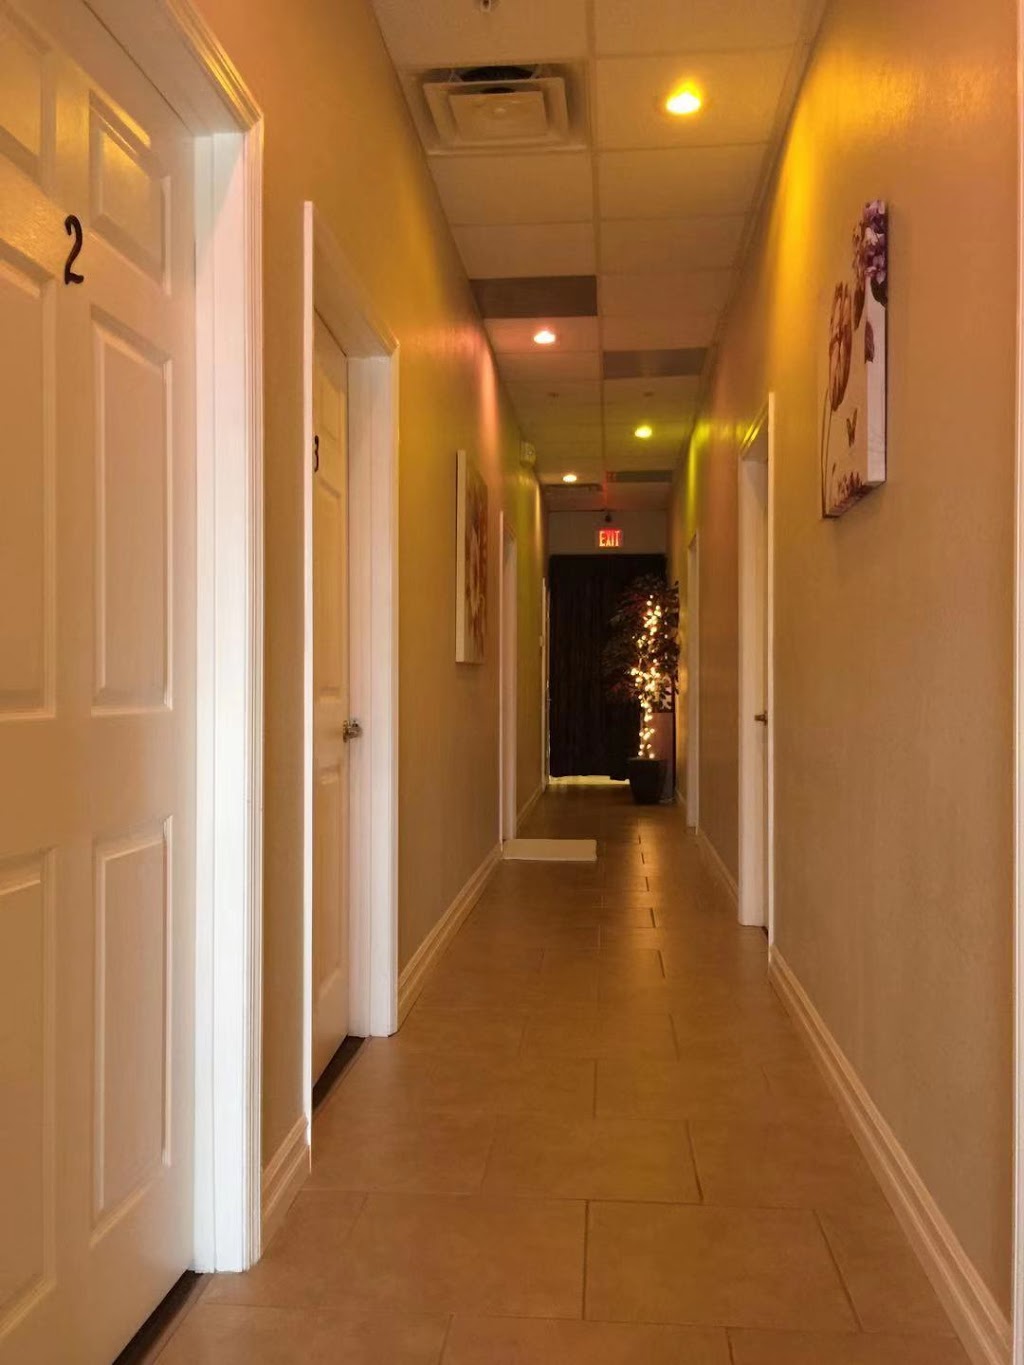 Spring Spa | 3950 S US Hwy 17 92 #1064, Casselberry, FL 32707 | Phone: (321) 207-0777